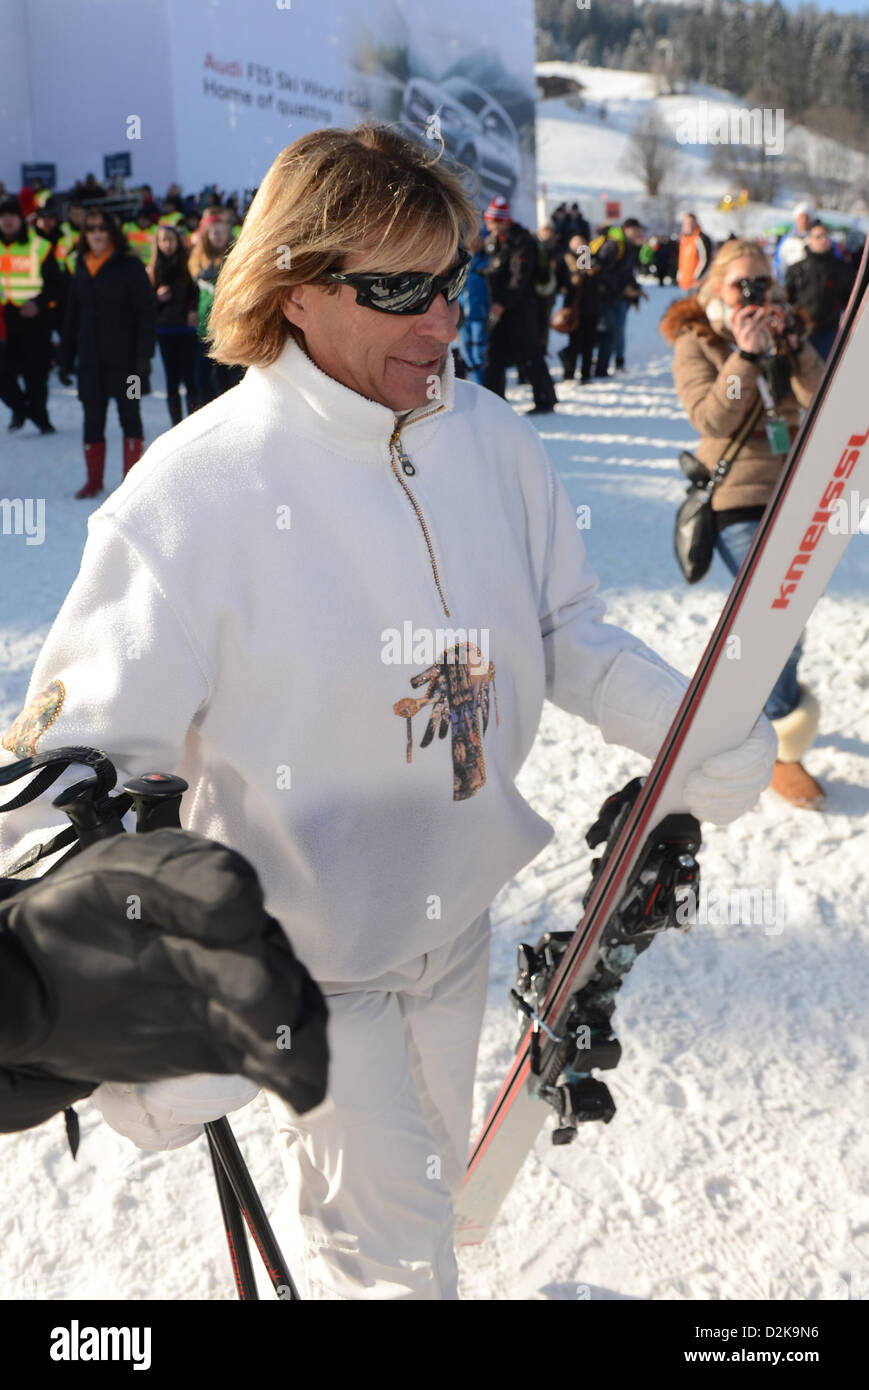 Singer Hansi Hinterseer walks through the spectator's area at the legendary Hahnenkamm Race in Kitzbuehel, Austria, 26 January 2013. This weekend celebrities are coming together in the ski metropolis. Photo: FELIX HOERHAGER Stock Photo